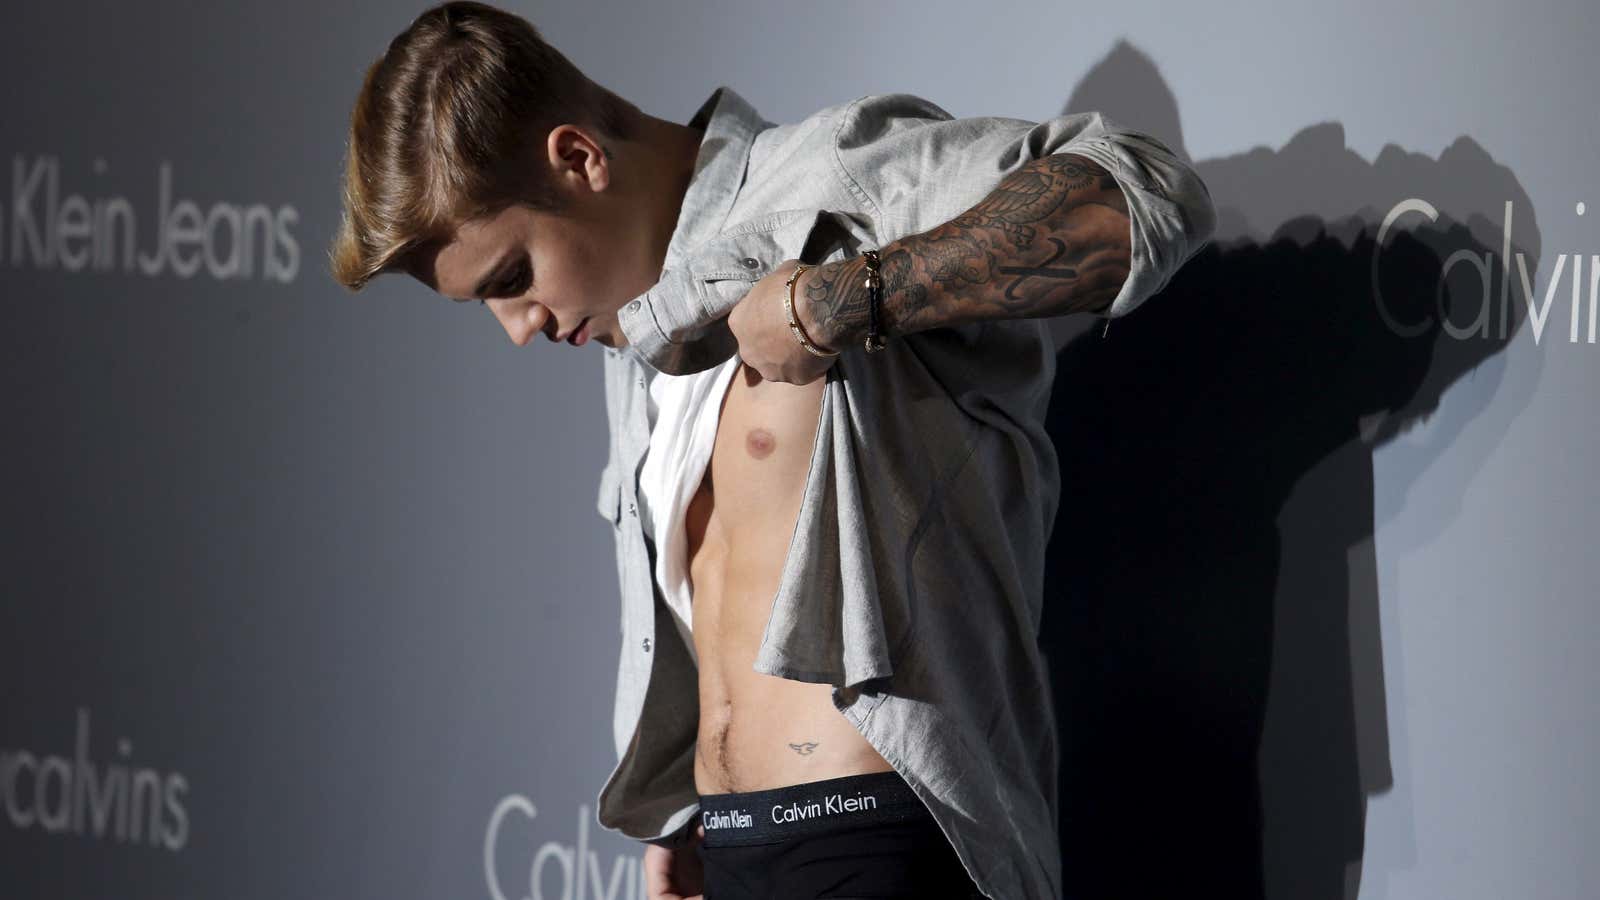 Calvin Klein is facing that it's a jeans and underwear company now